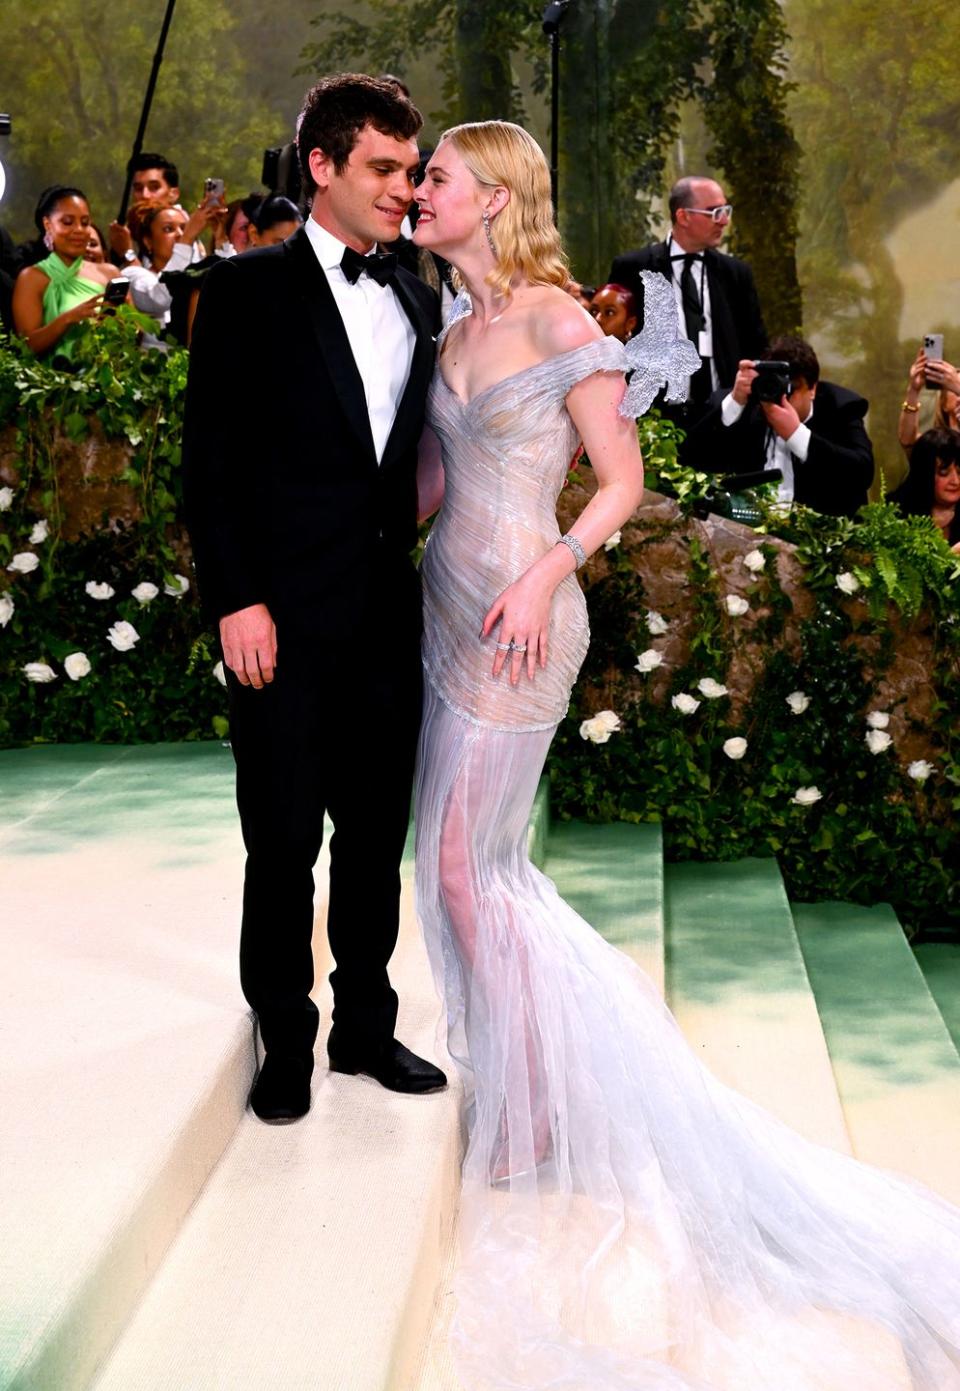 gus wenner and elle fanning attending the metropolitan museum of art costume institute benefit gala 2024 in new york, usa picture date monday may 6, 2024 photo by matt crossickpa images via getty images